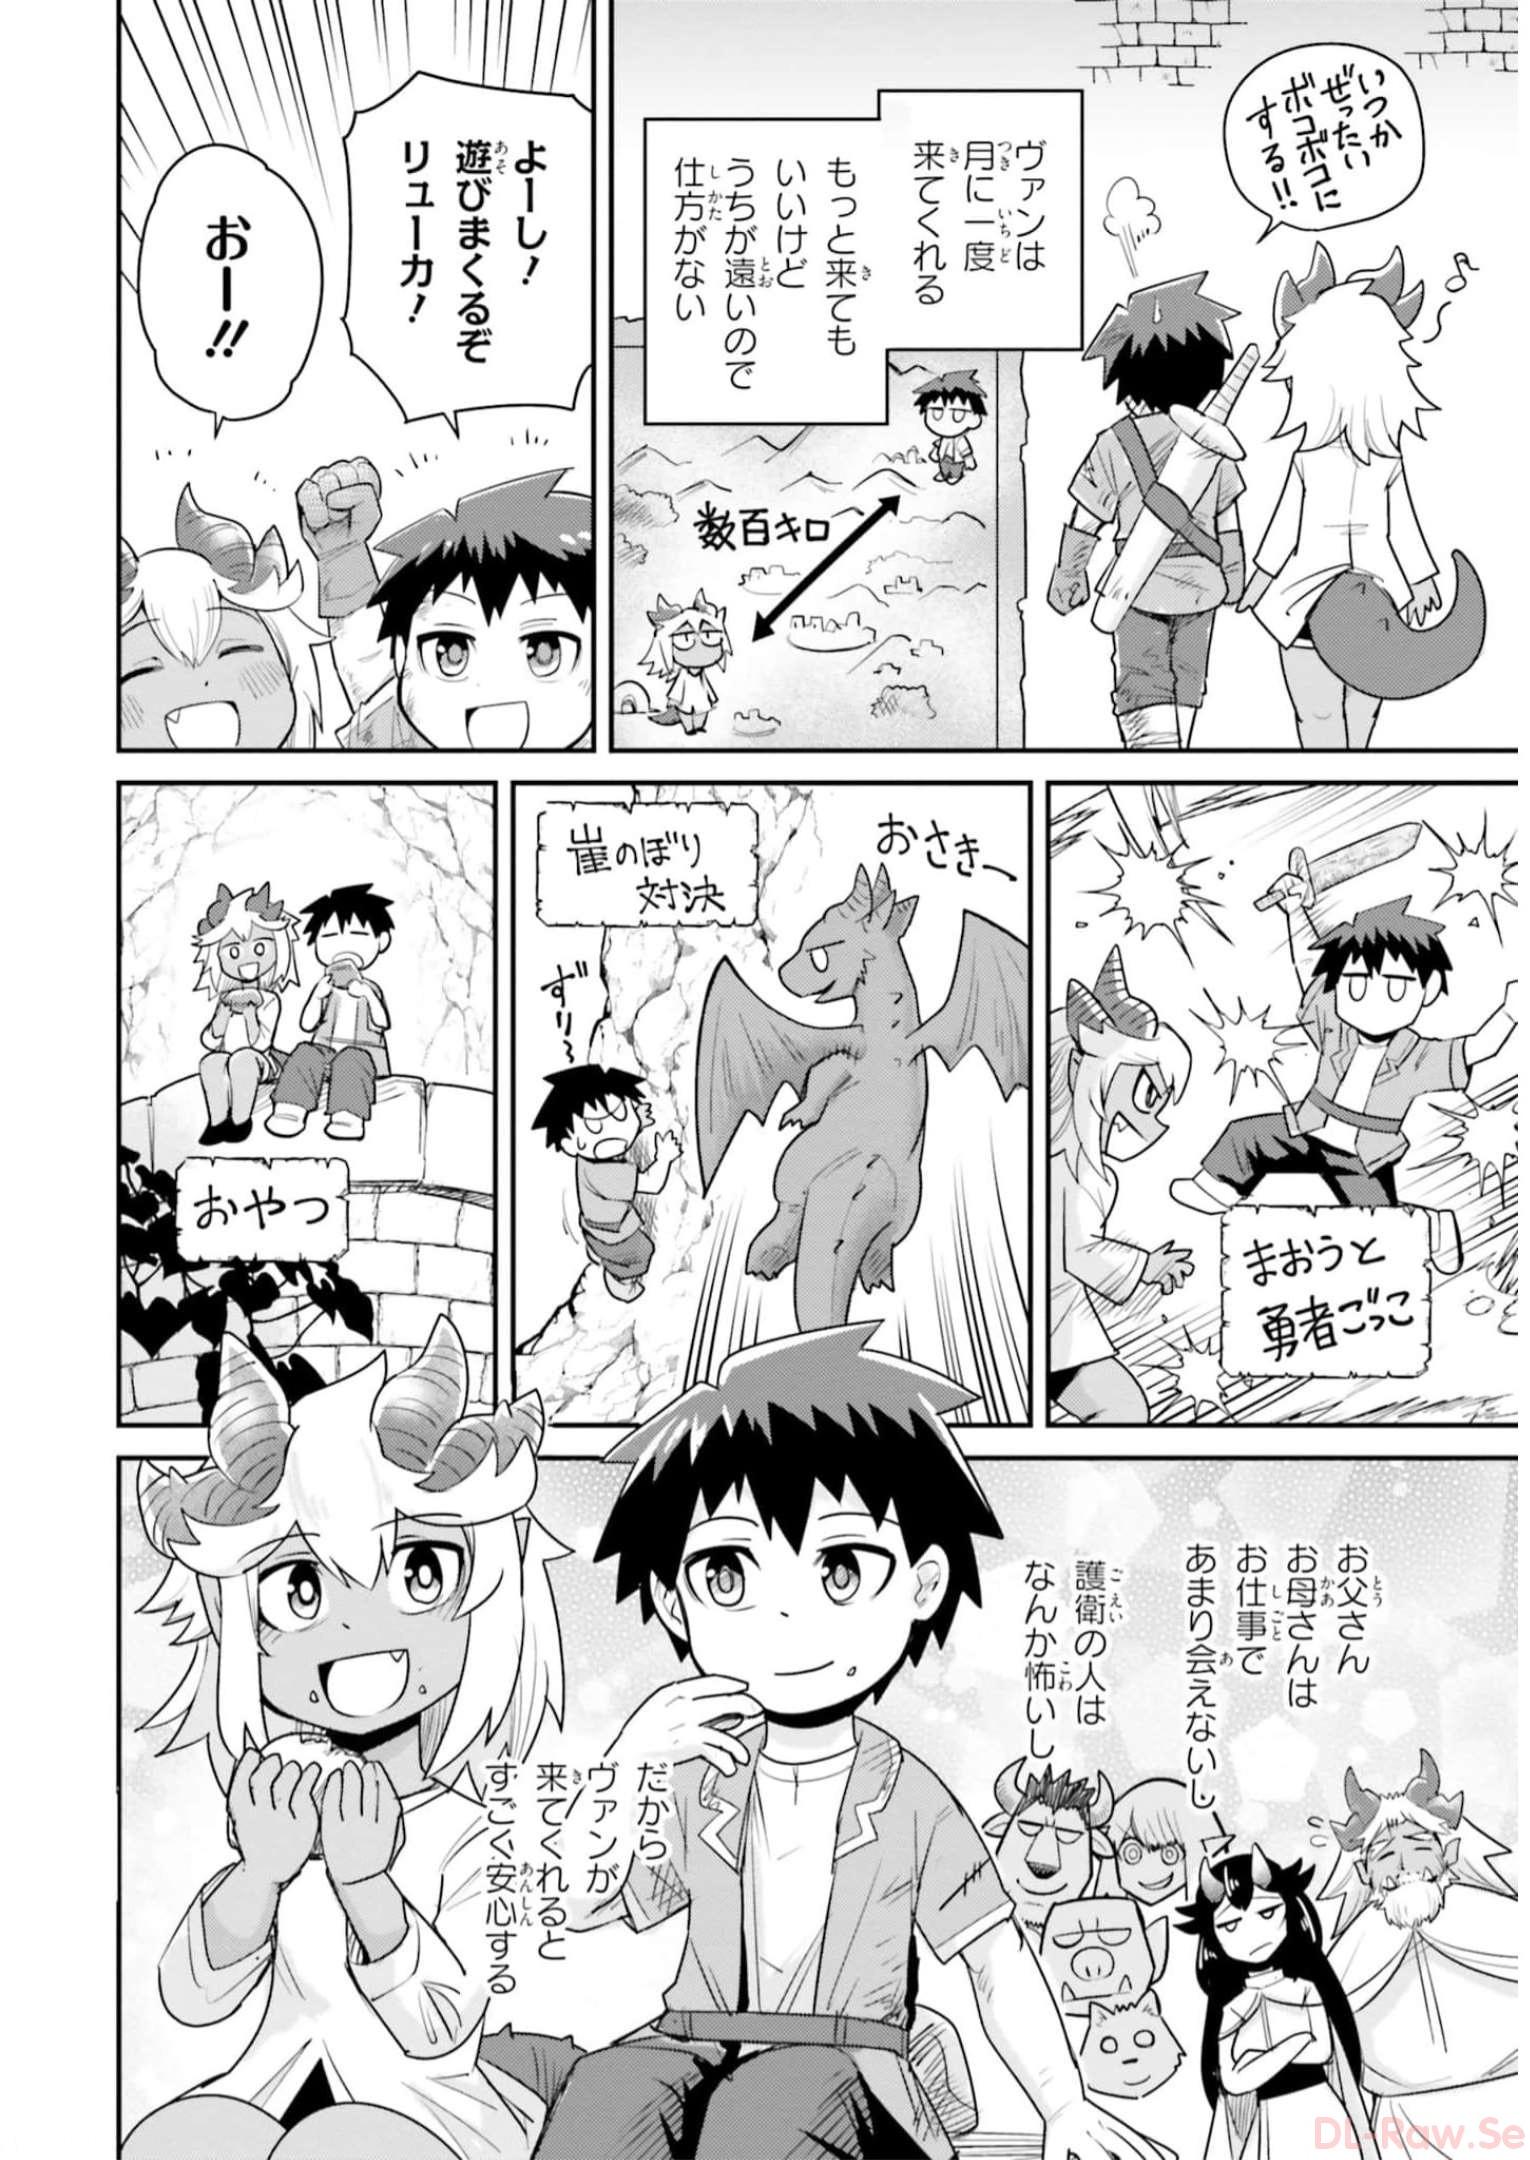 Dungeon Friends Forever Dungeon's Childhood Friend ダンジョンの幼なじみ 第18.1話 - Page 2